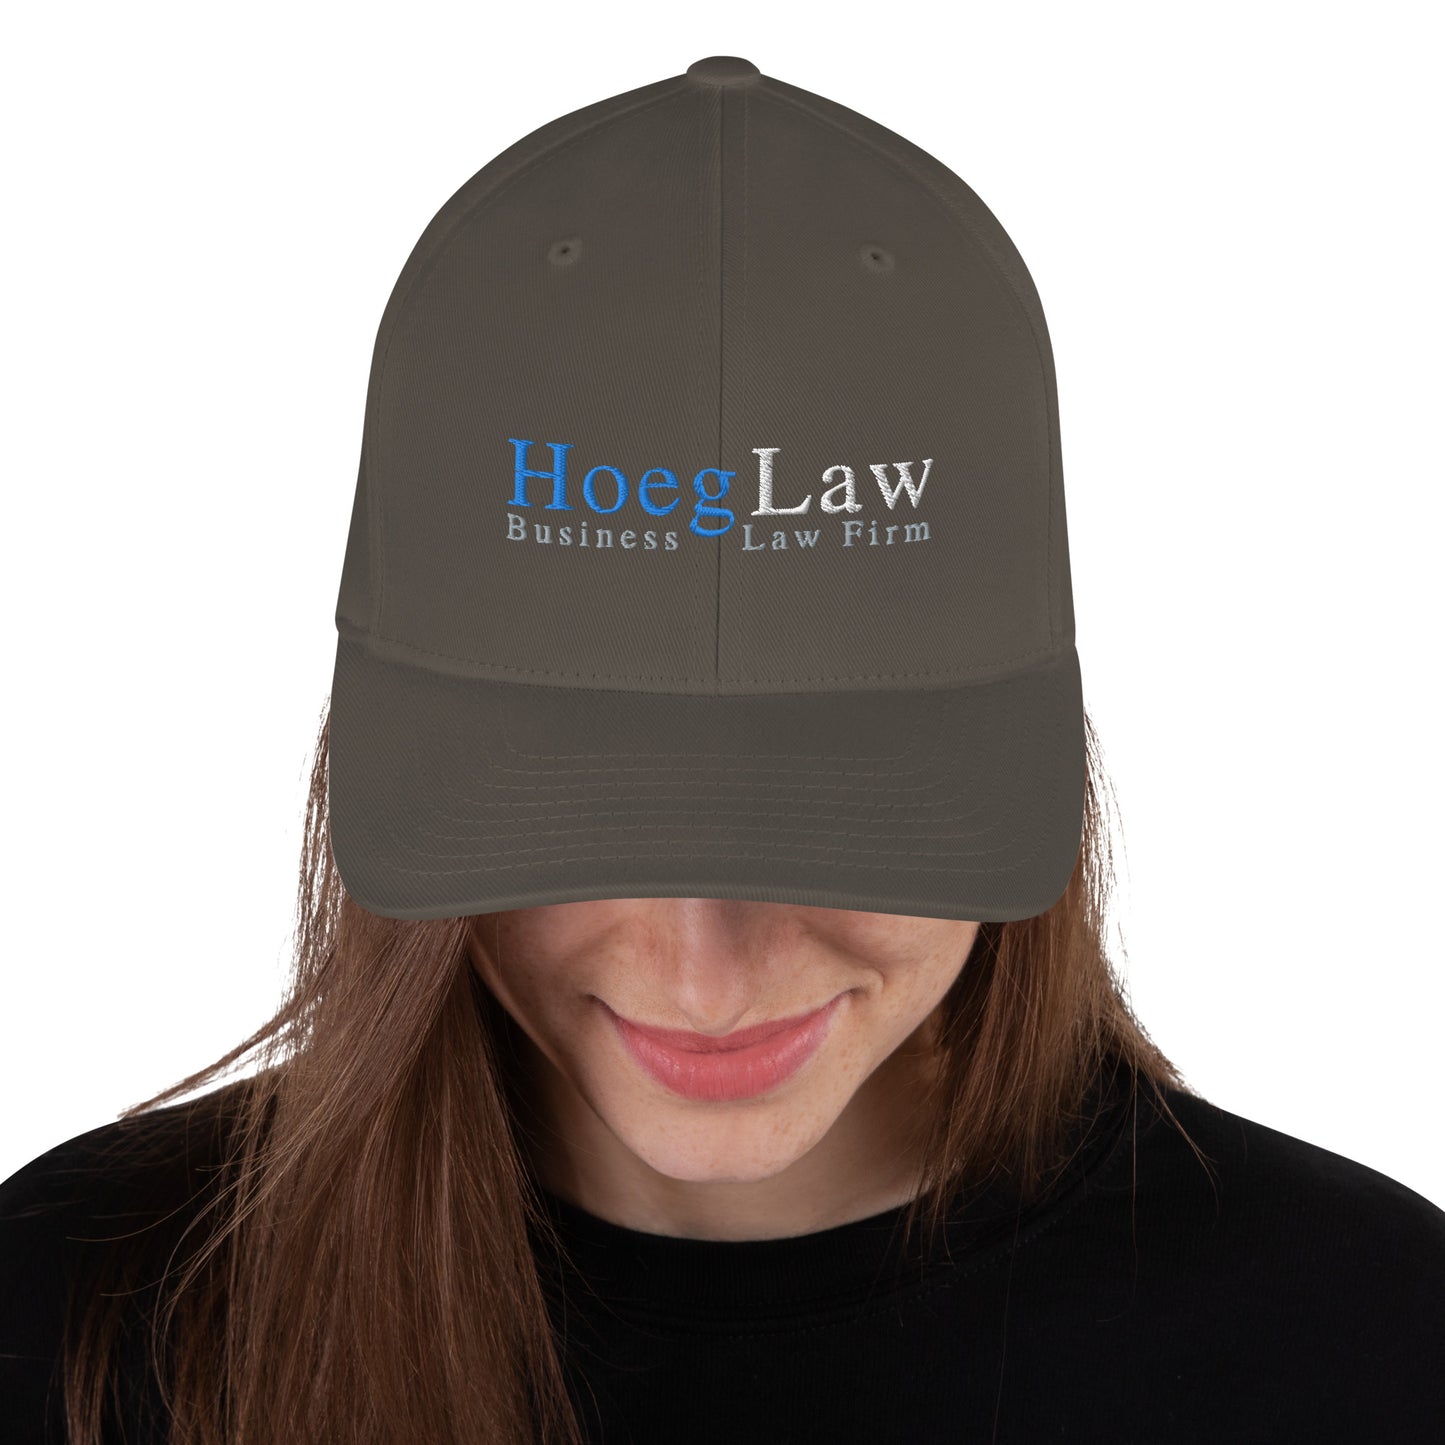 Hoeg Law Business Law Firm - Fitted Hat